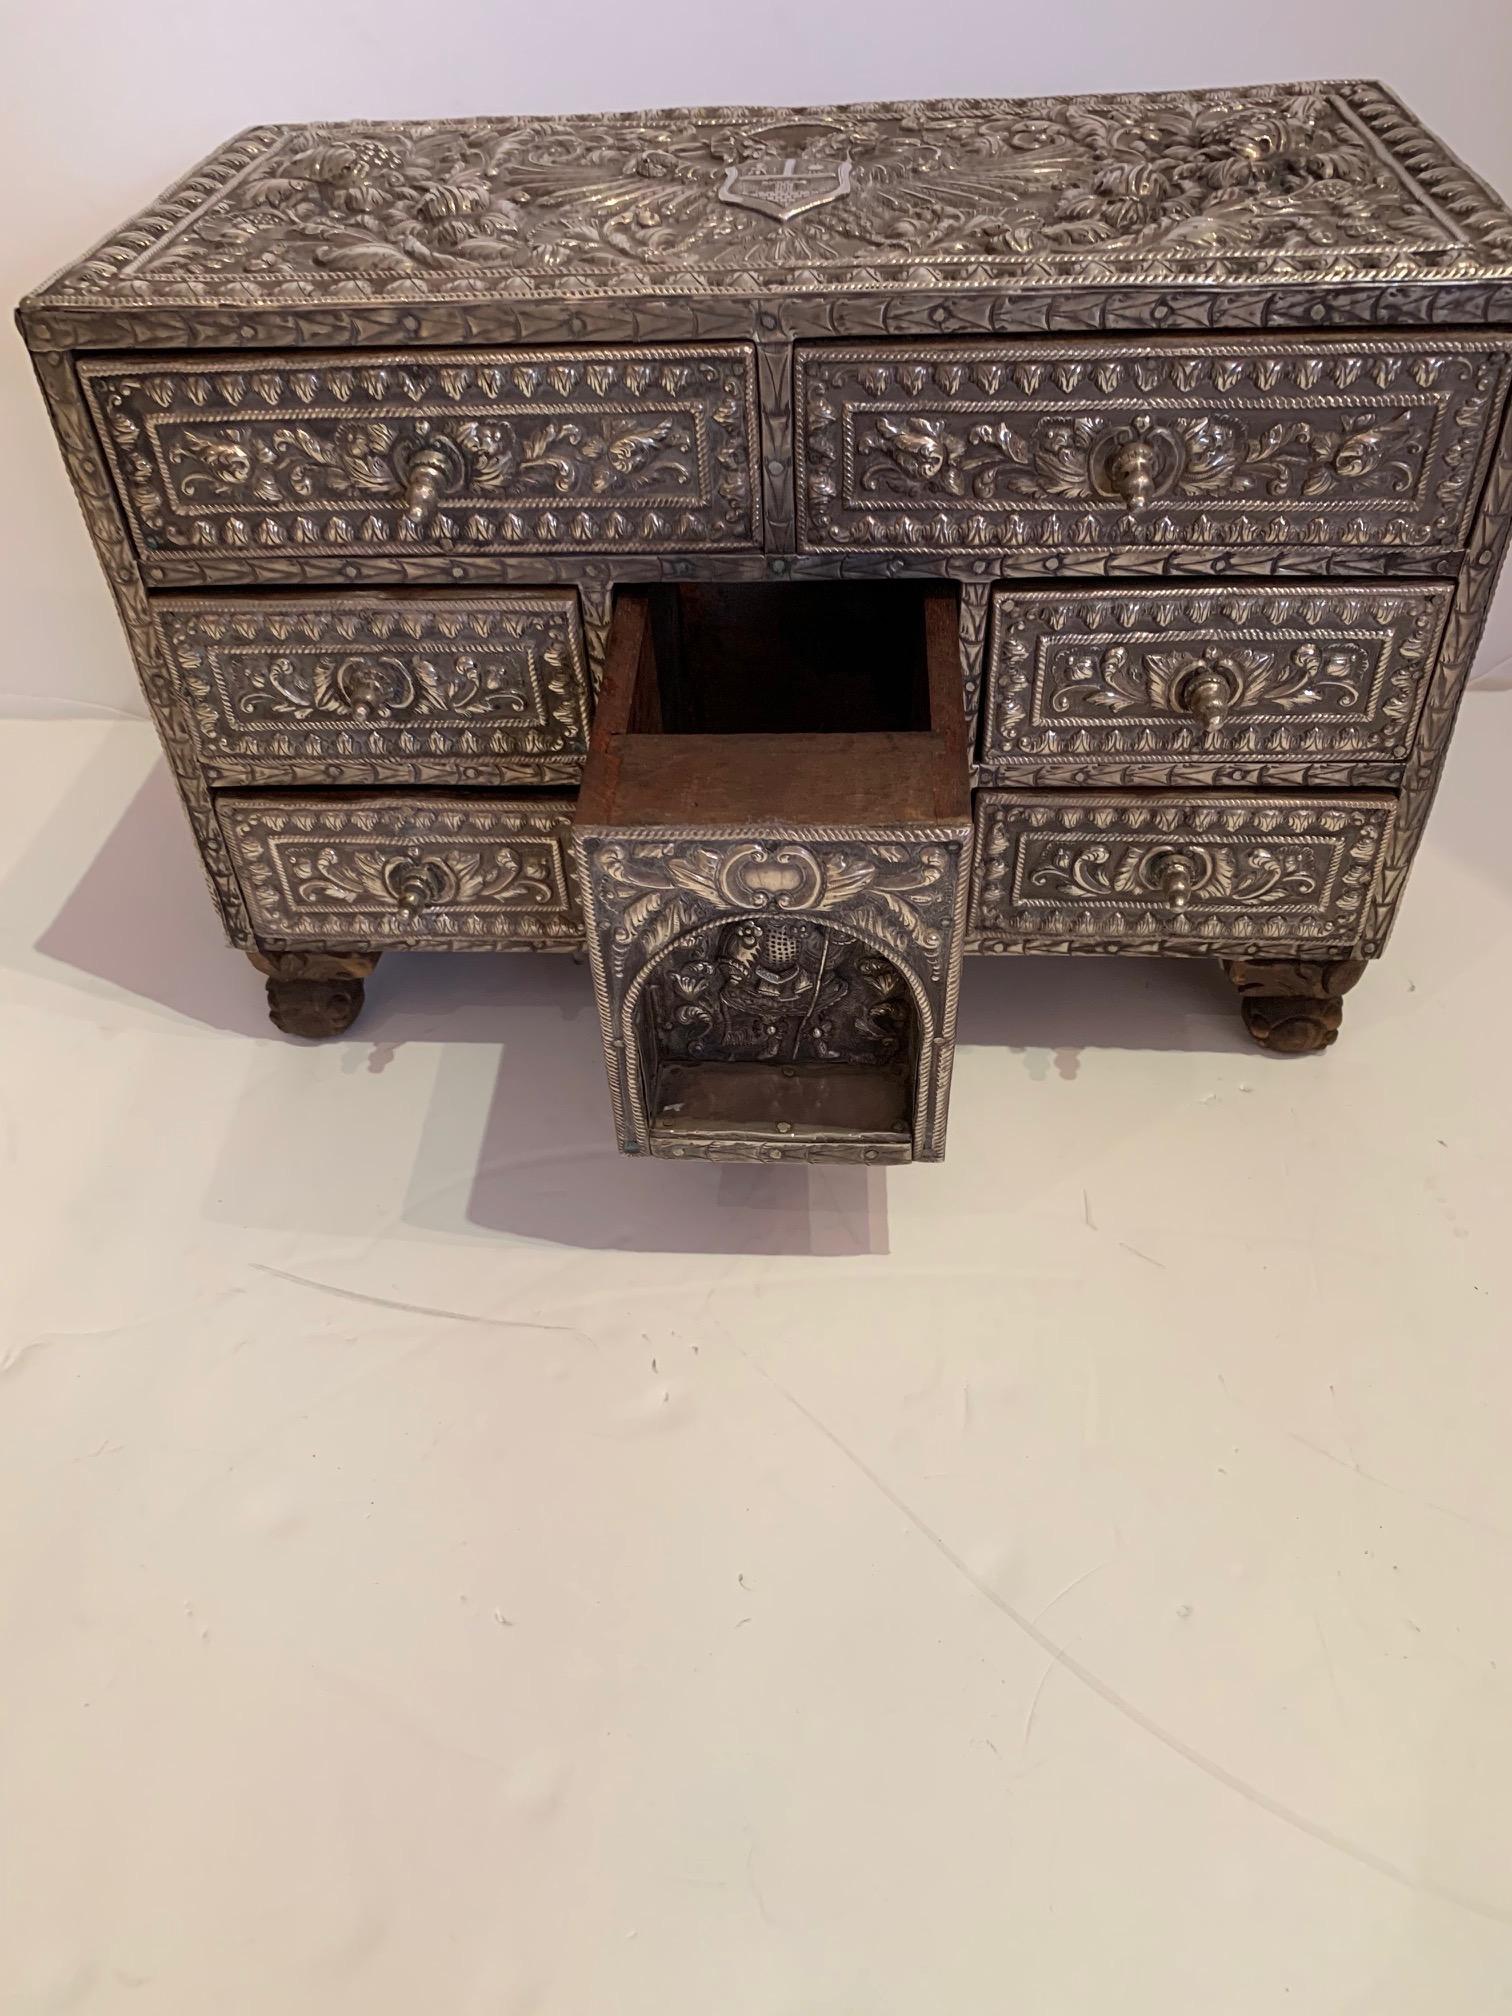 Metal Gorgeous Indian Silvered Filigree Box with Many Drawers